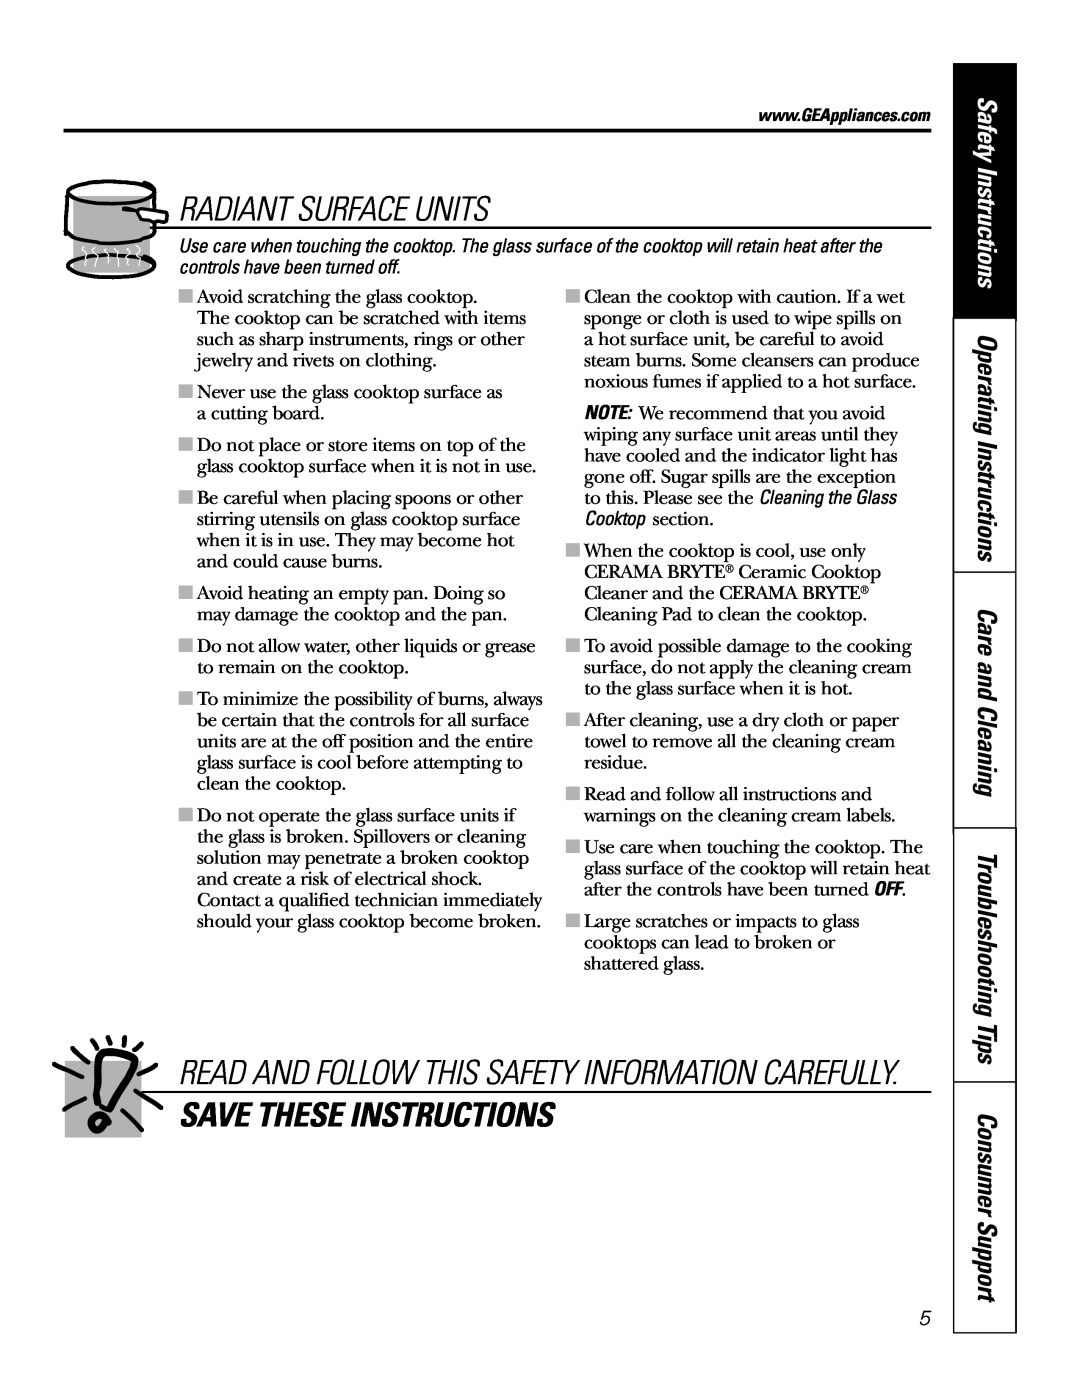 GE JP350 owner manual Radiant Surface Units, Save These Instructions, Consumer Support, Safety Instructions 